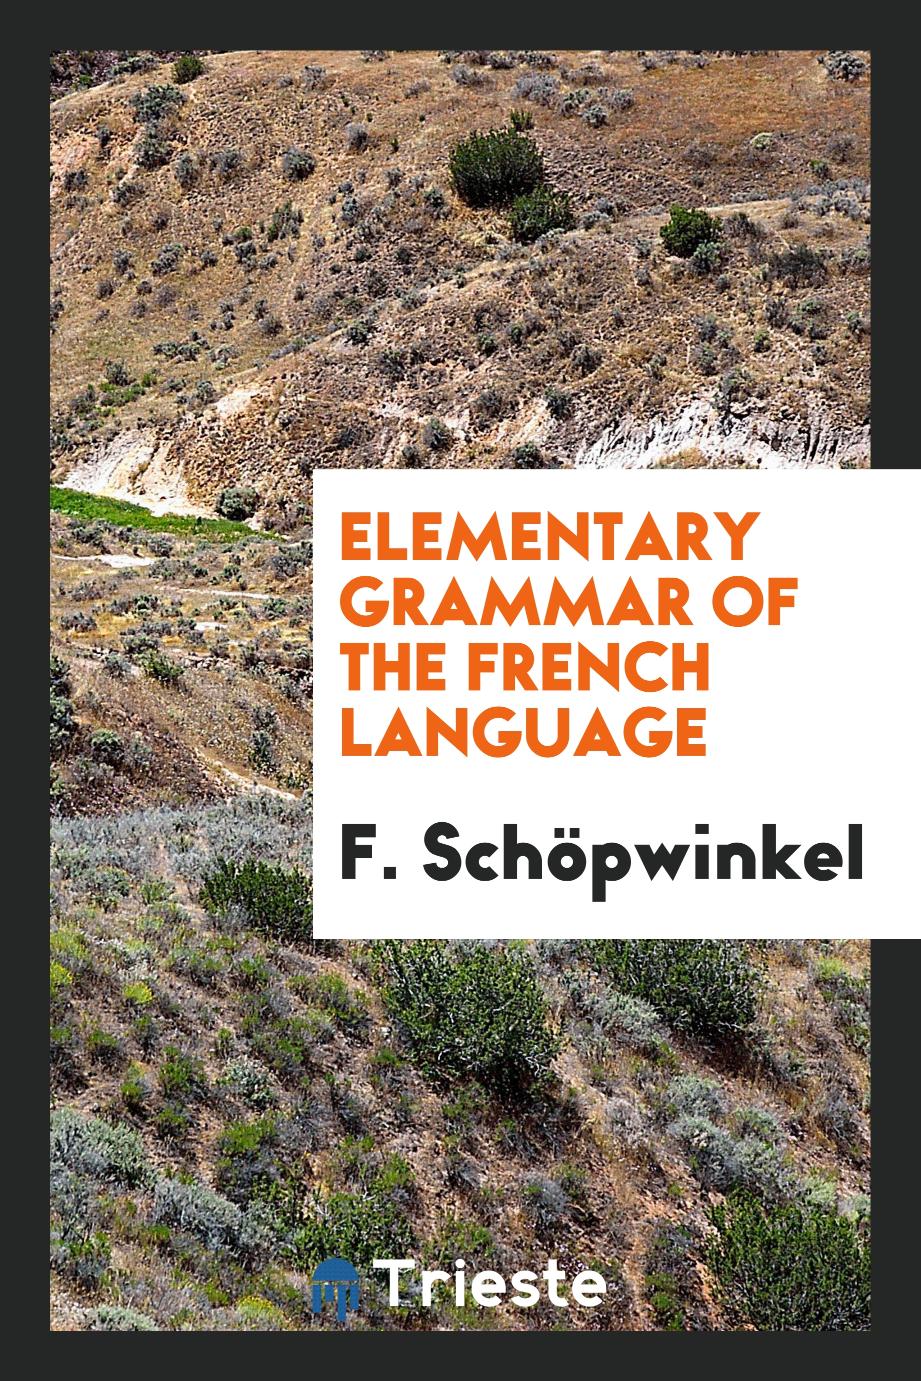 Elementary Grammar of the French Language